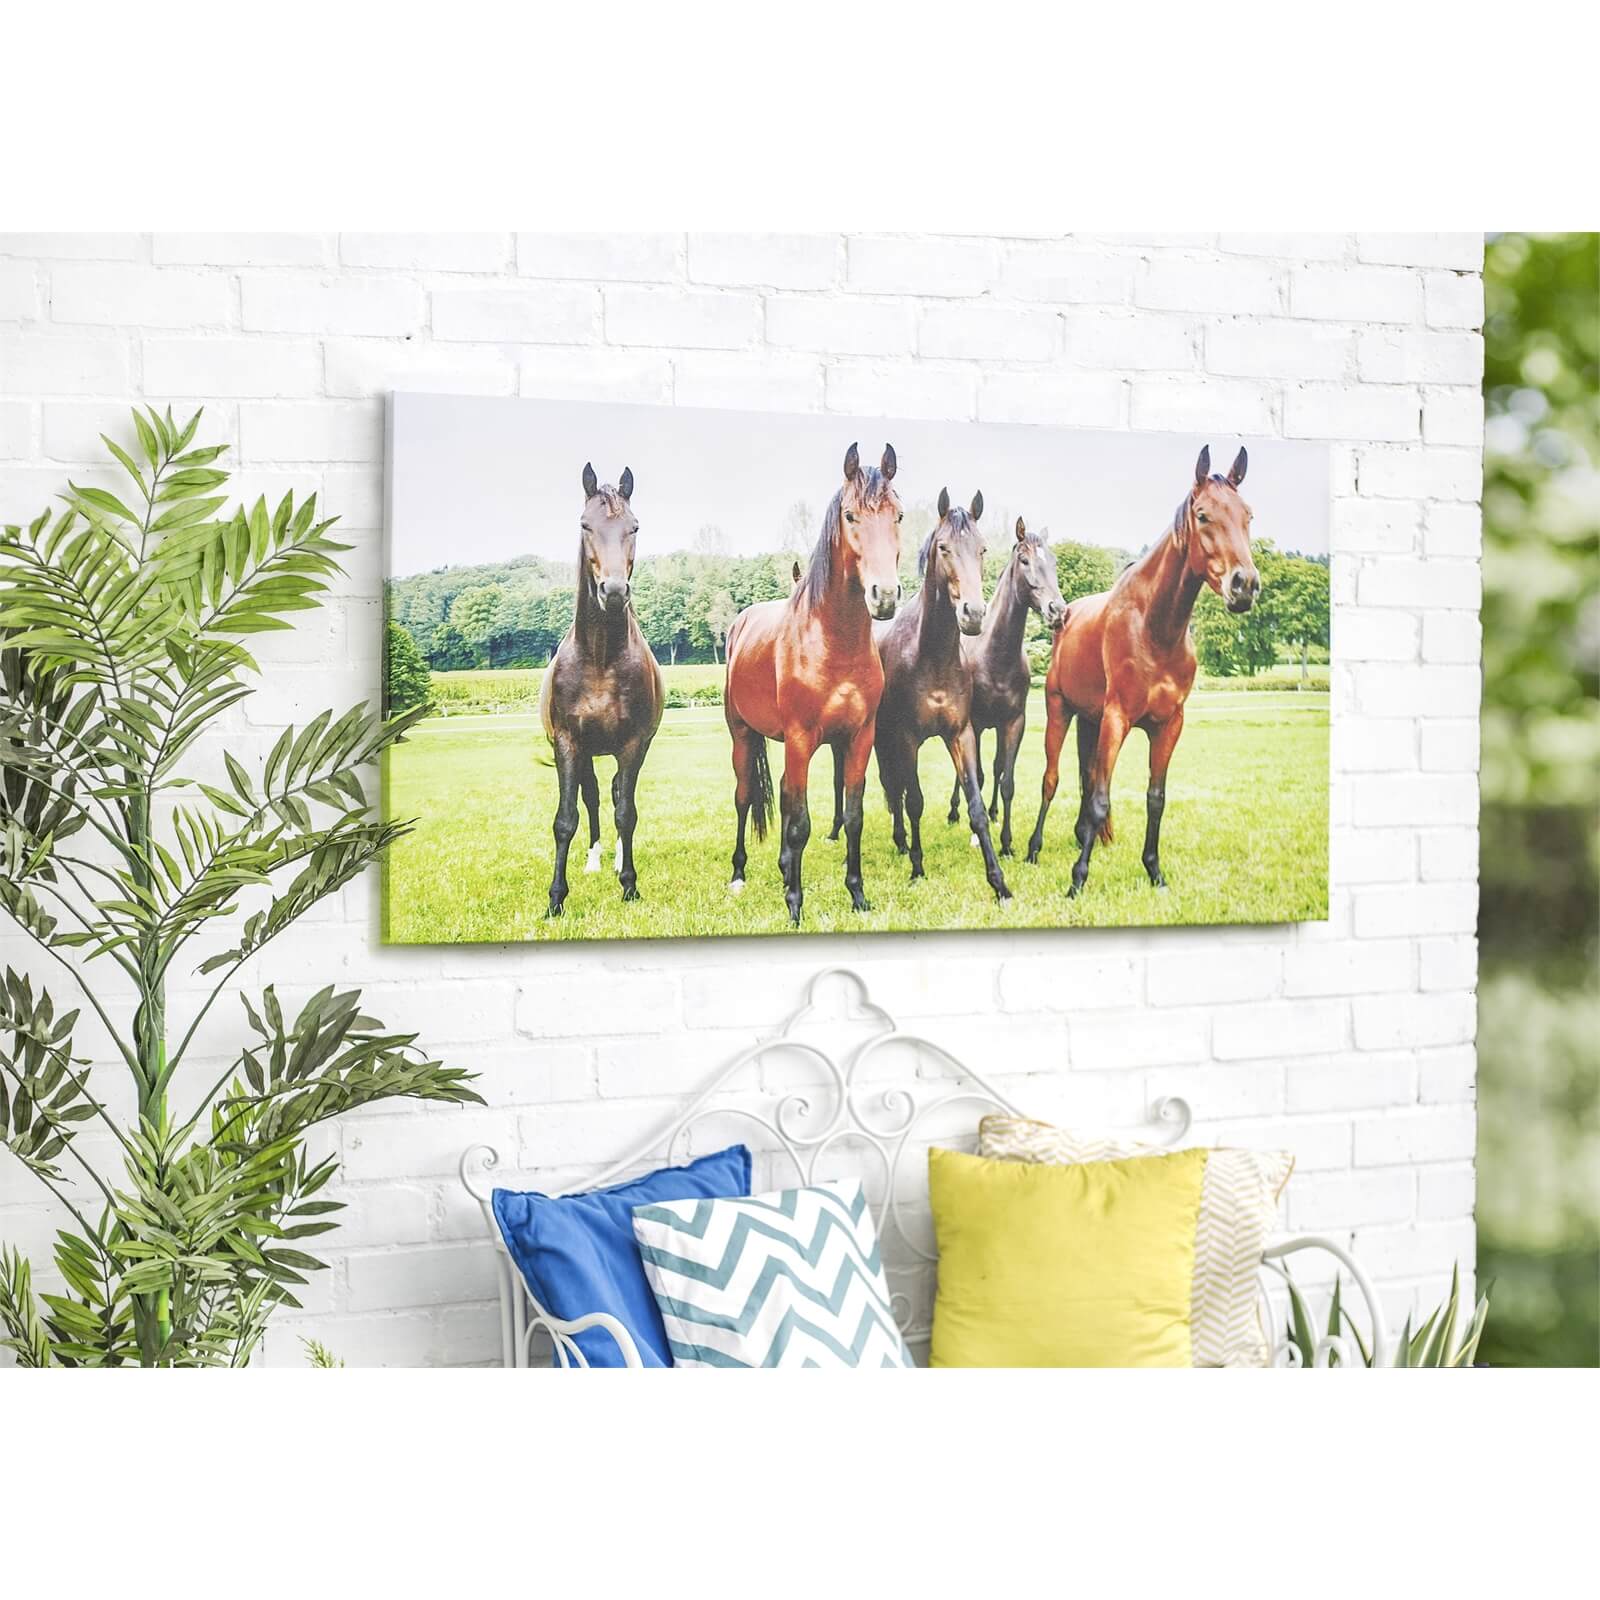 Interested Horses Outdoor Canvas 70x140cm